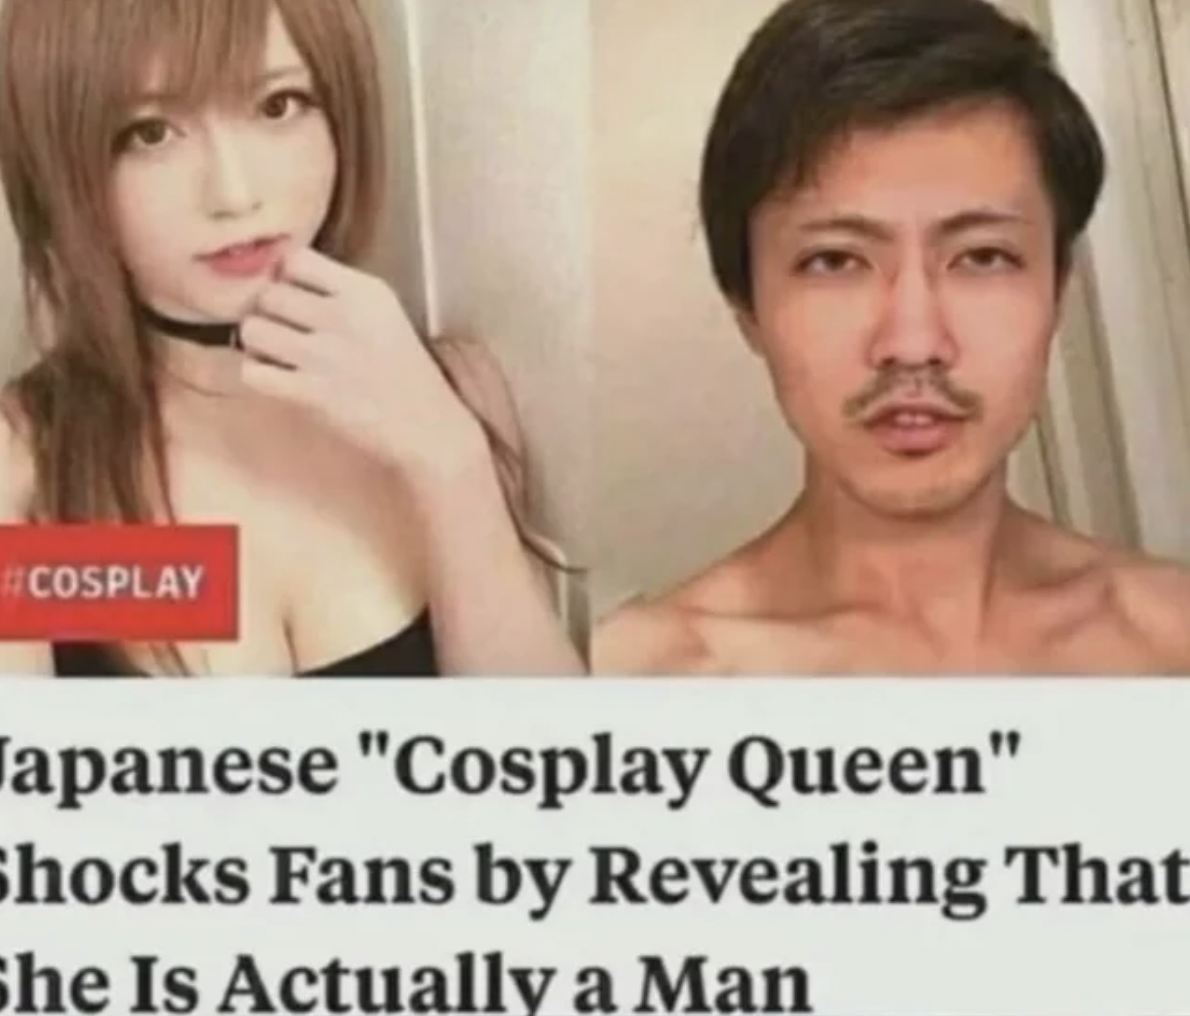 japanese cosplay queen reveals - Japanese "Cosplay Queen" Shocks Fans by Revealing That She Is Actually a Man